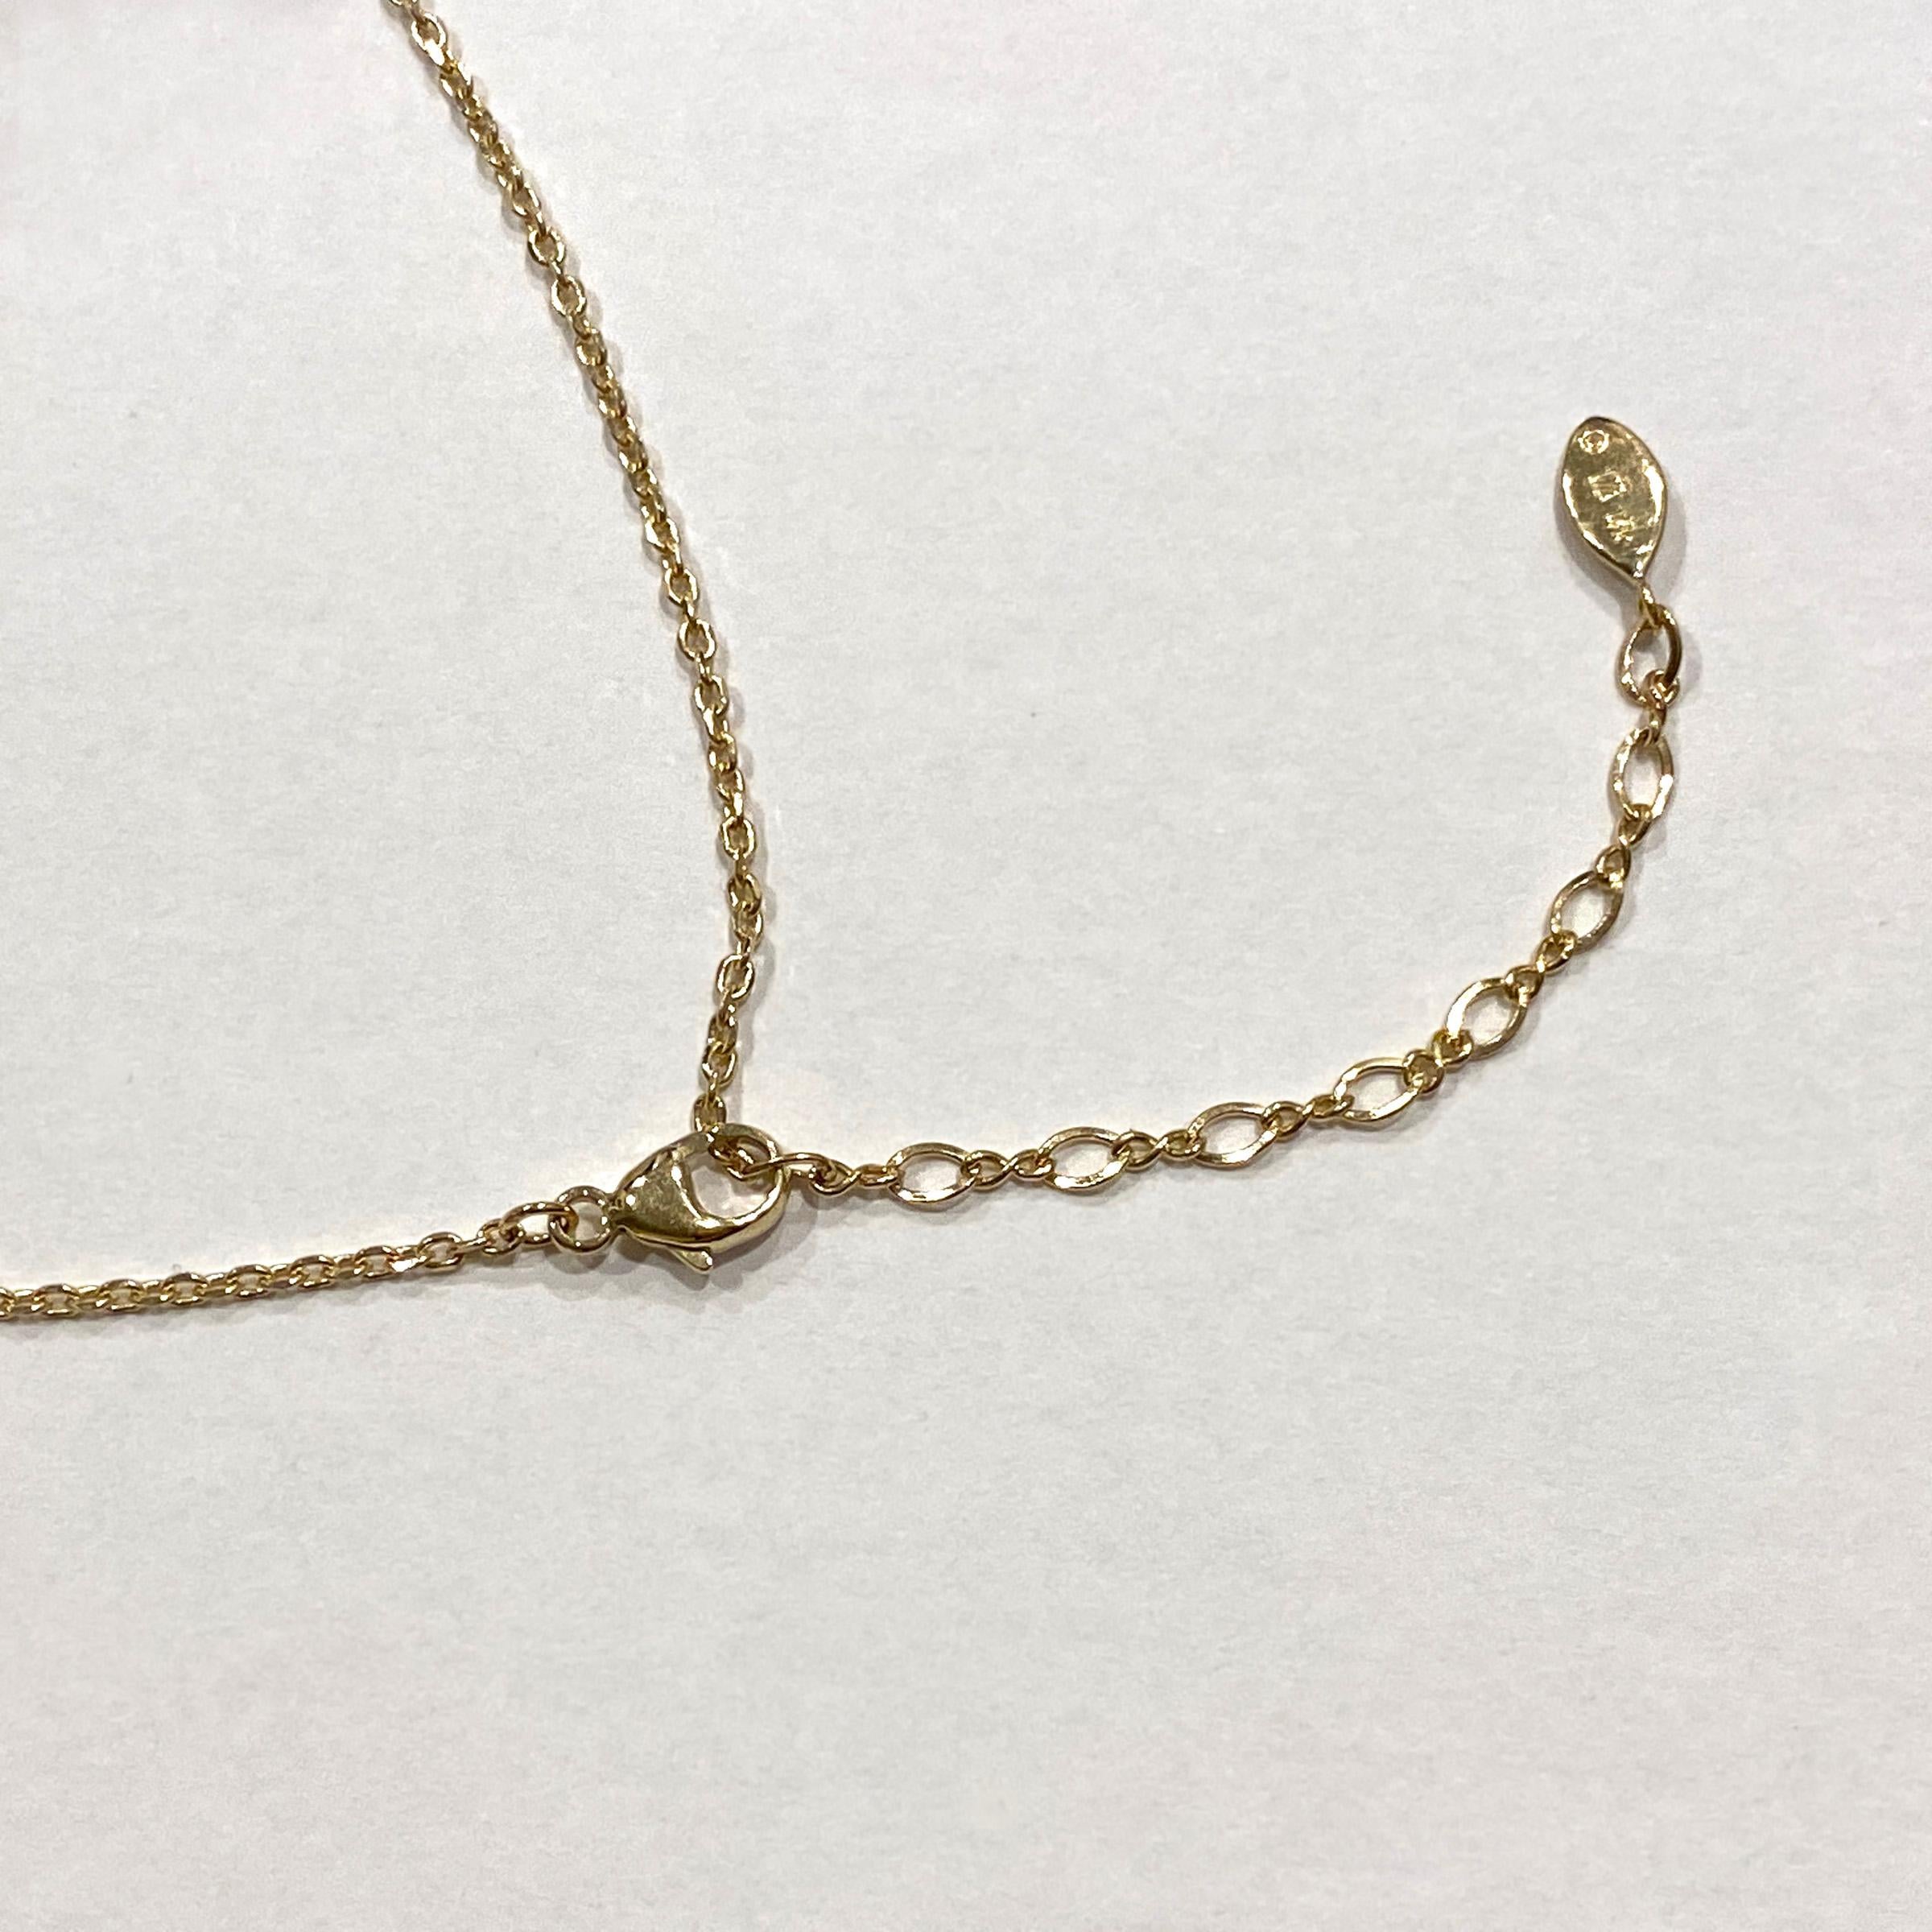 Contemporary 18 Karat Gold Seaside Necklace with Diamond Accents and an Adjustable Chain For Sale